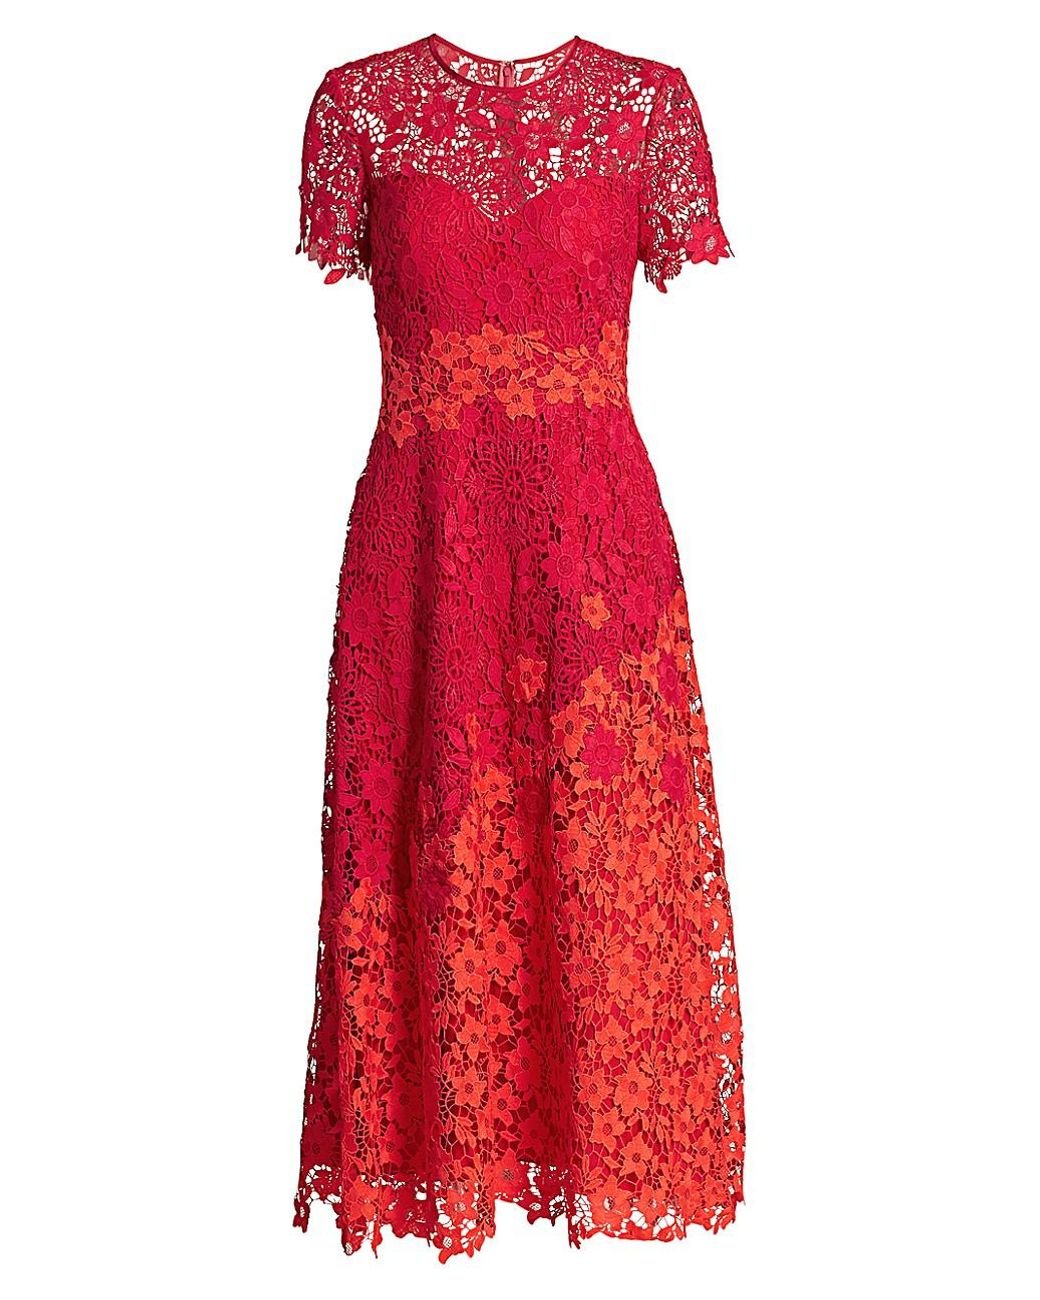 THEIA Lace A-line Midi Dress in Cherry Orange (Red) | Lyst